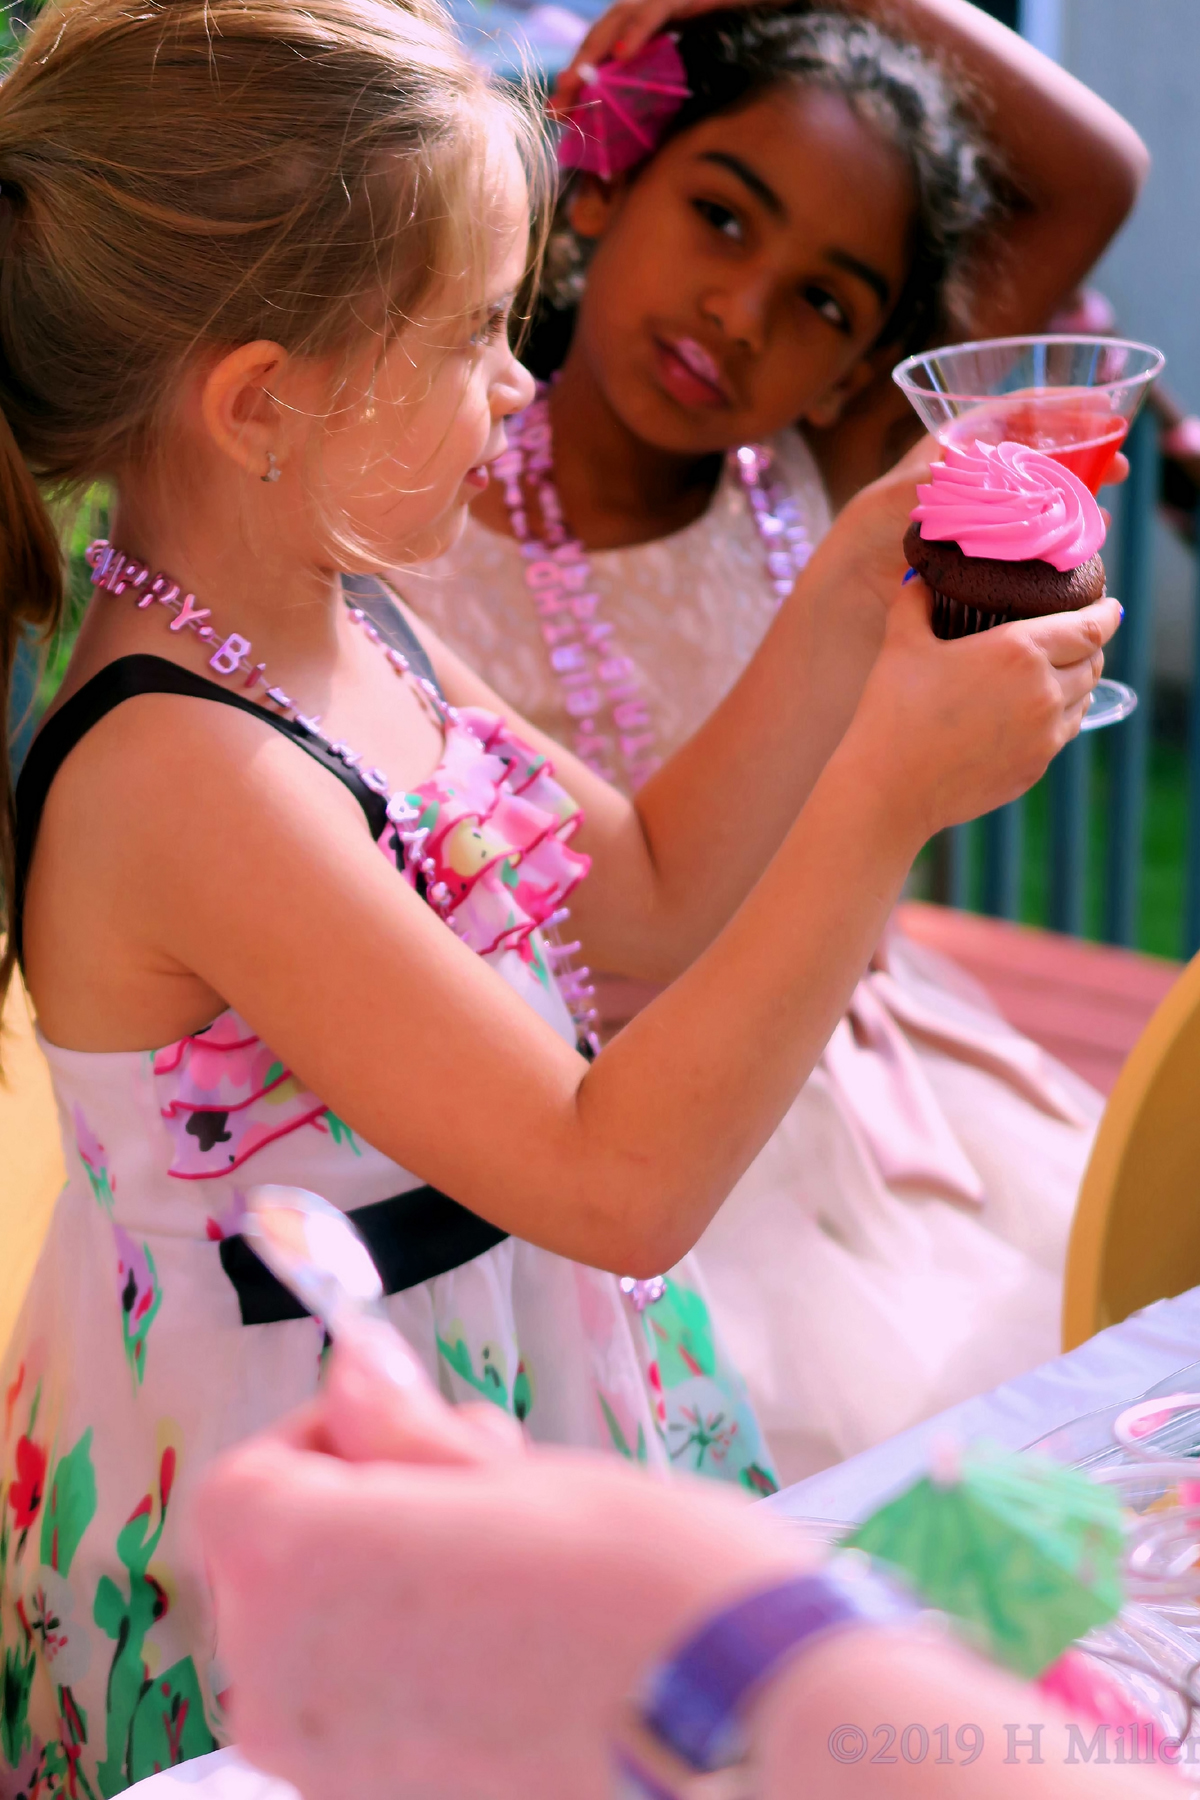 Guest Enjoying Her Cake And Drink while Amiya Looks On With A Smile! 